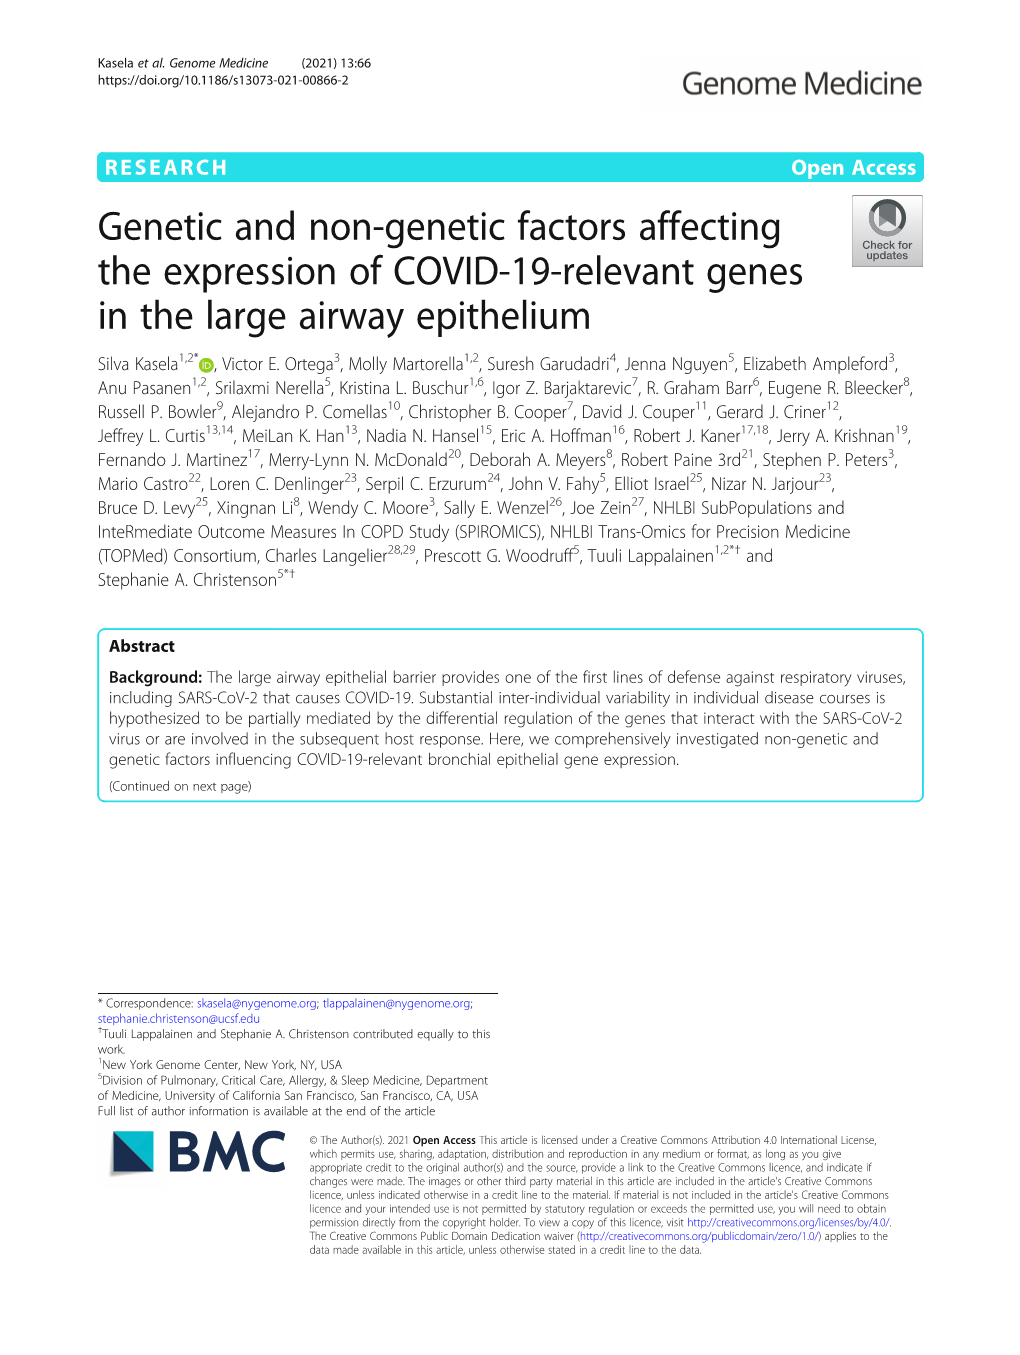 Genetic and Non-Genetic Factors Affecting the Expression of COVID-19-Relevant Genes in the Large Airway Epithelium Silva Kasela1,2* , Victor E